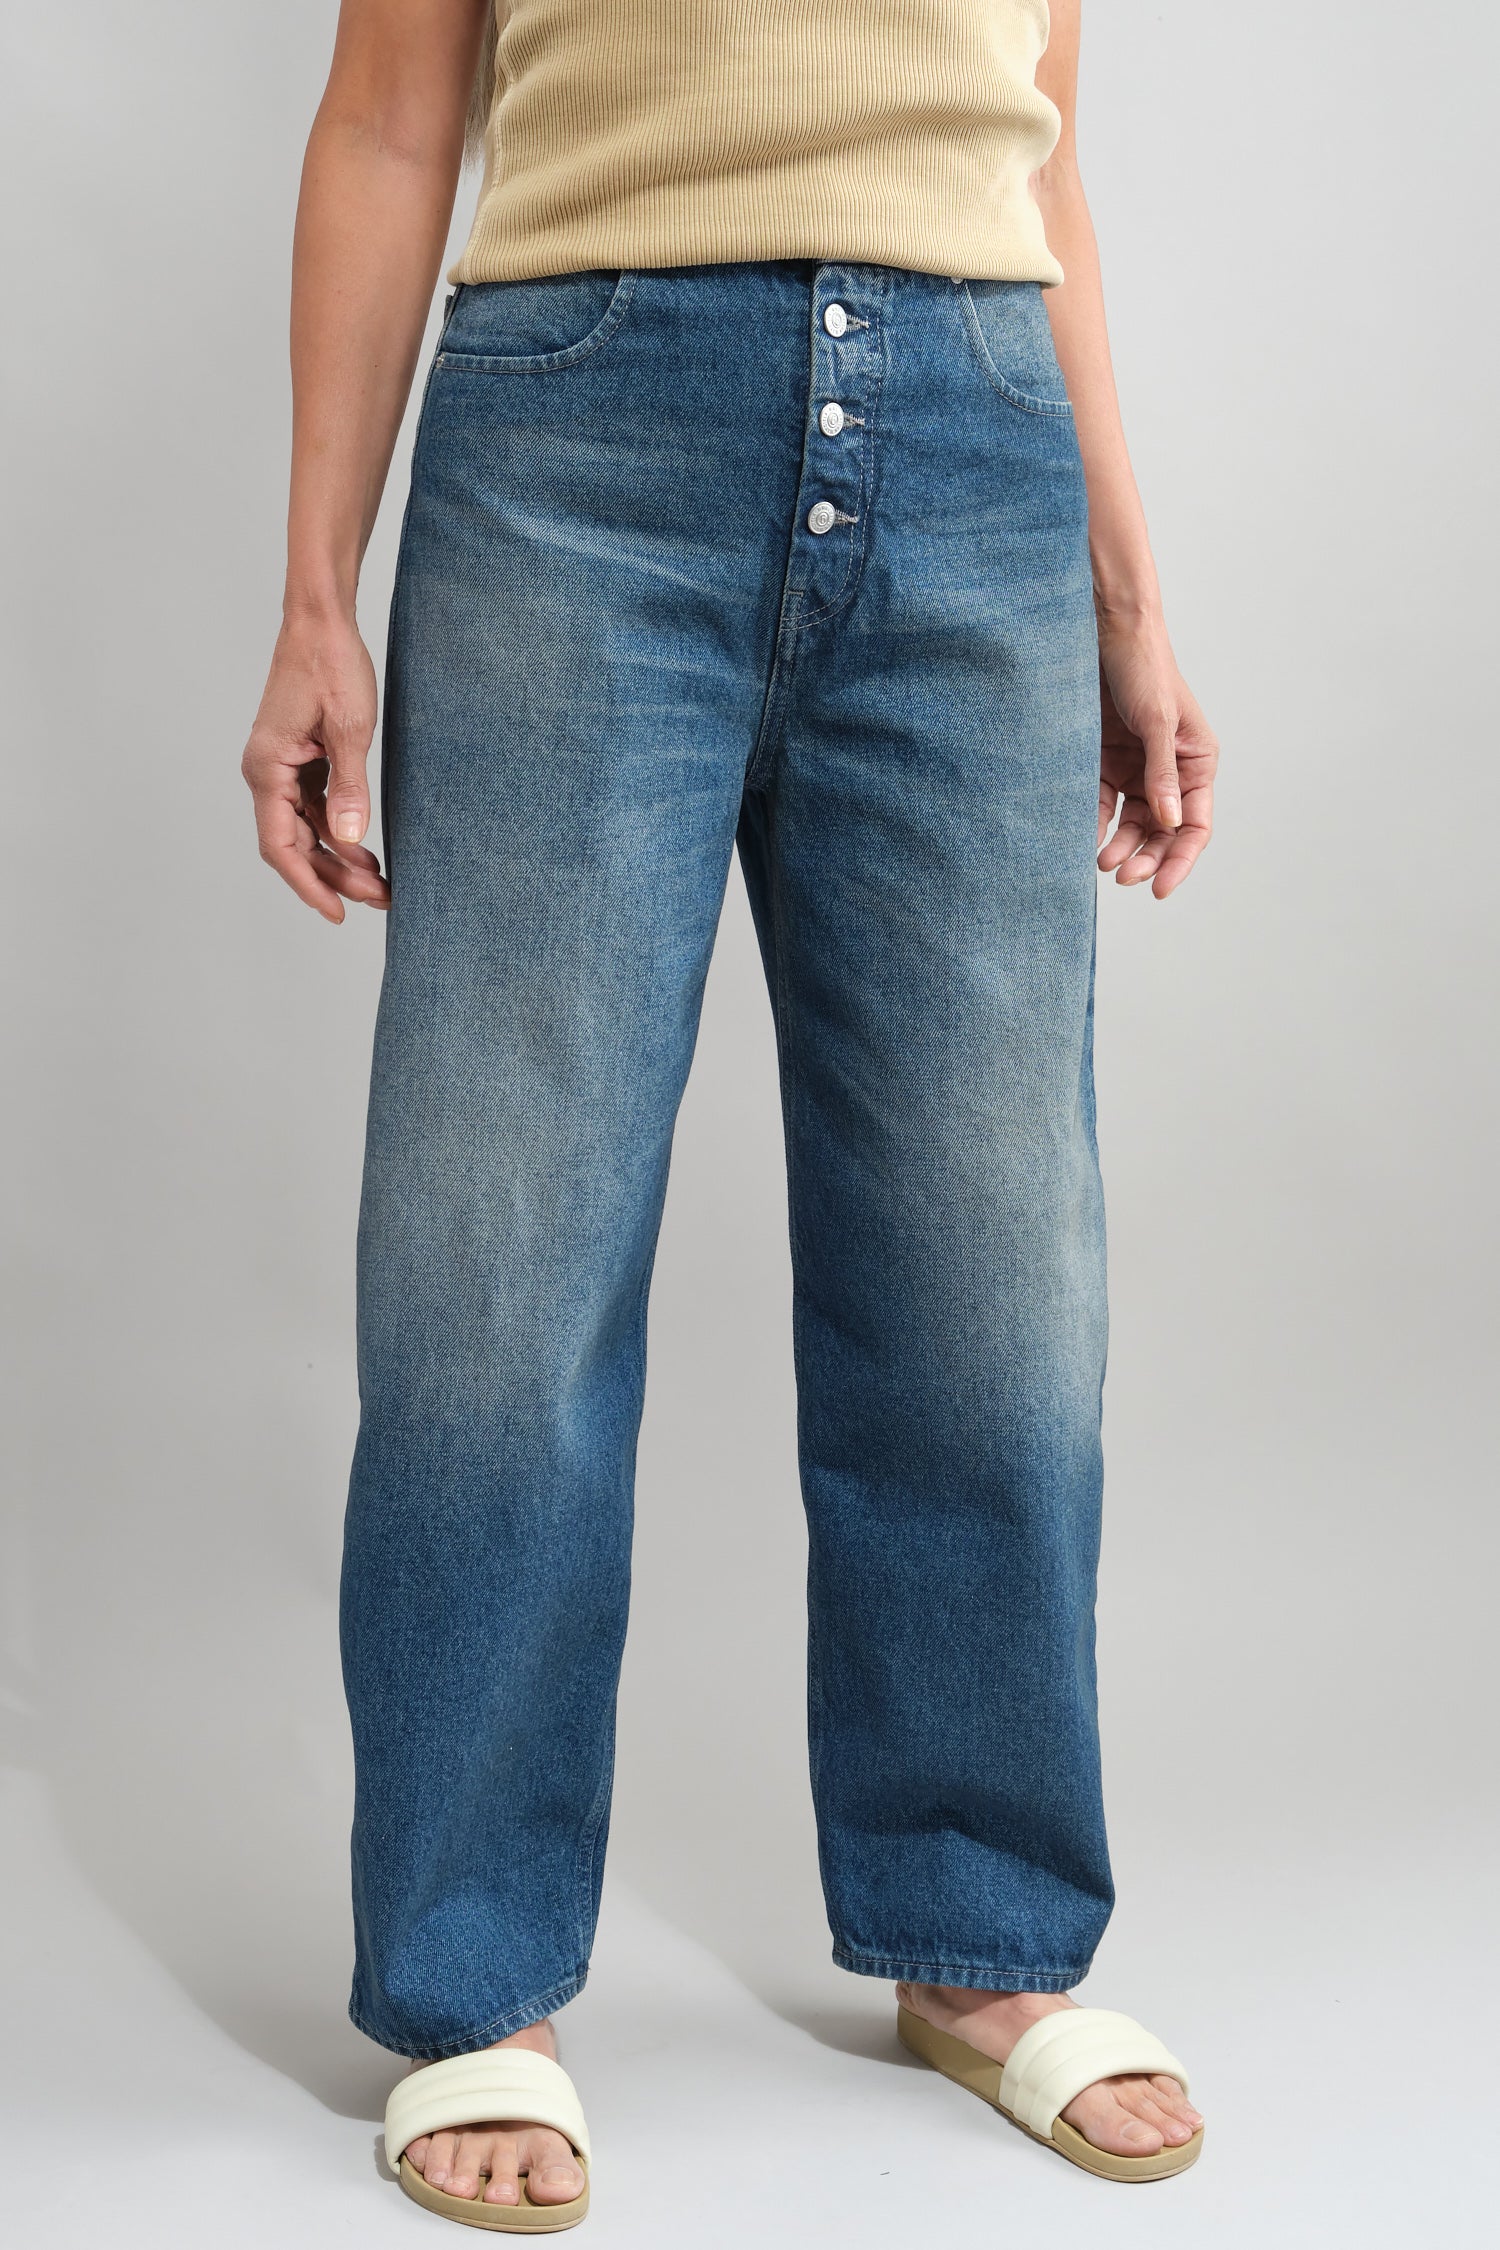 Front of Carrot Jeans in Medium Wash